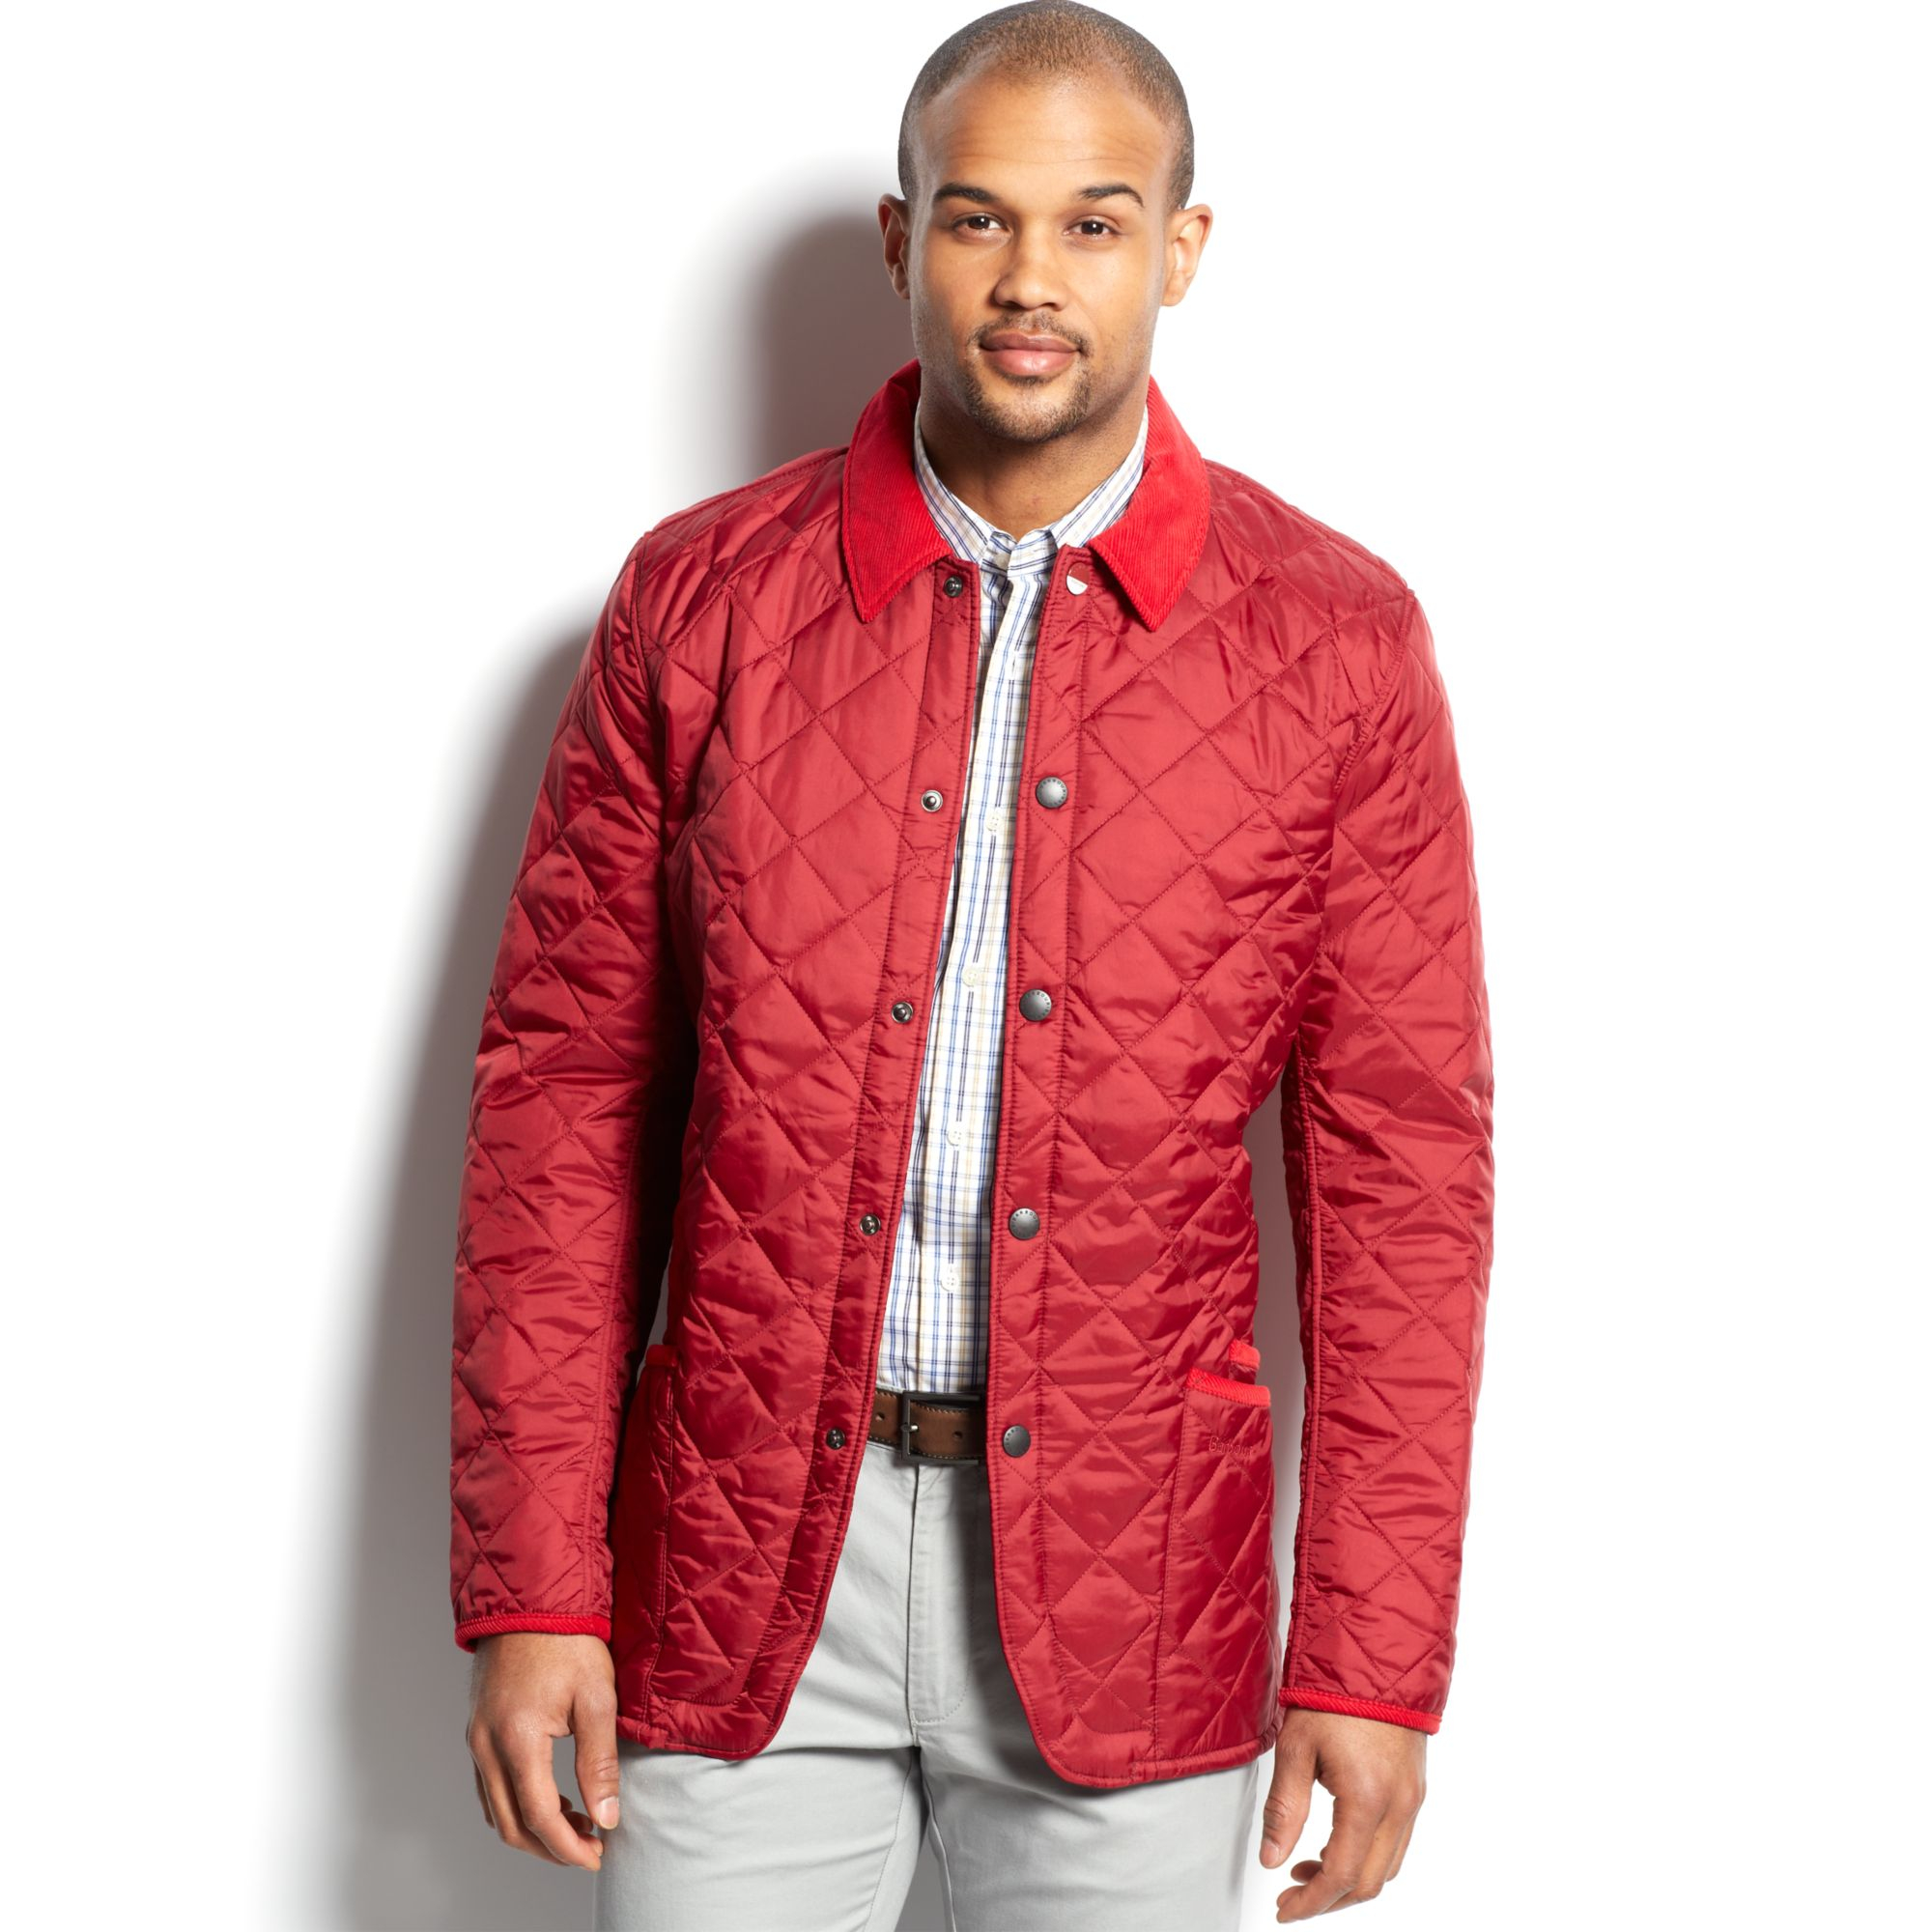 barbour red puffer jacket